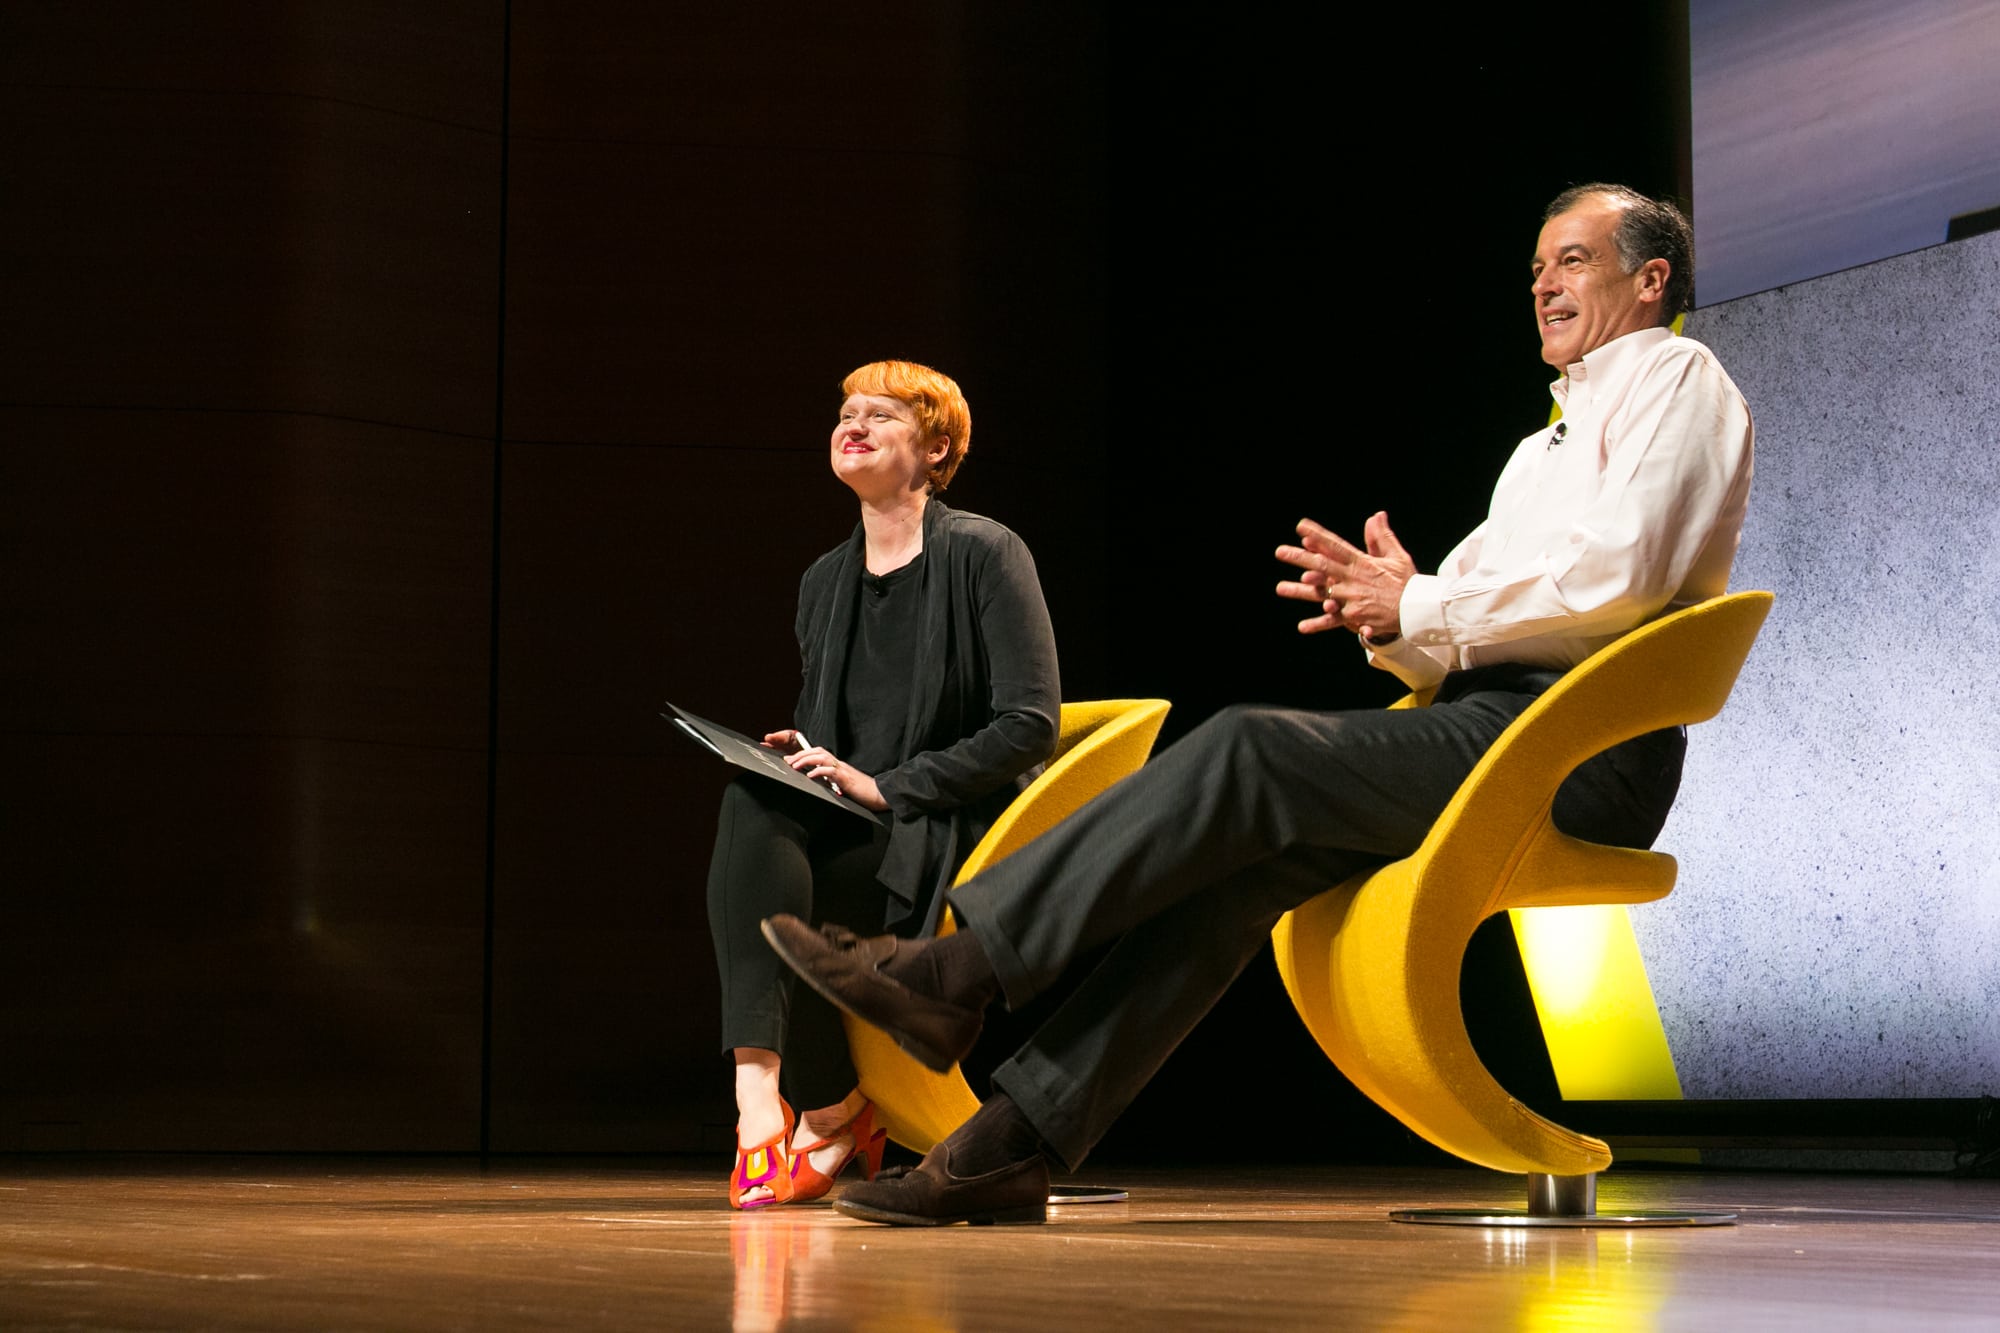 AFAR Editor-in-Chief Julia Cosgrove (L) and Club Med CEO Henri Giscard D'Estaing at Skift Global Forum in New York, Sept. 27, 2016. 